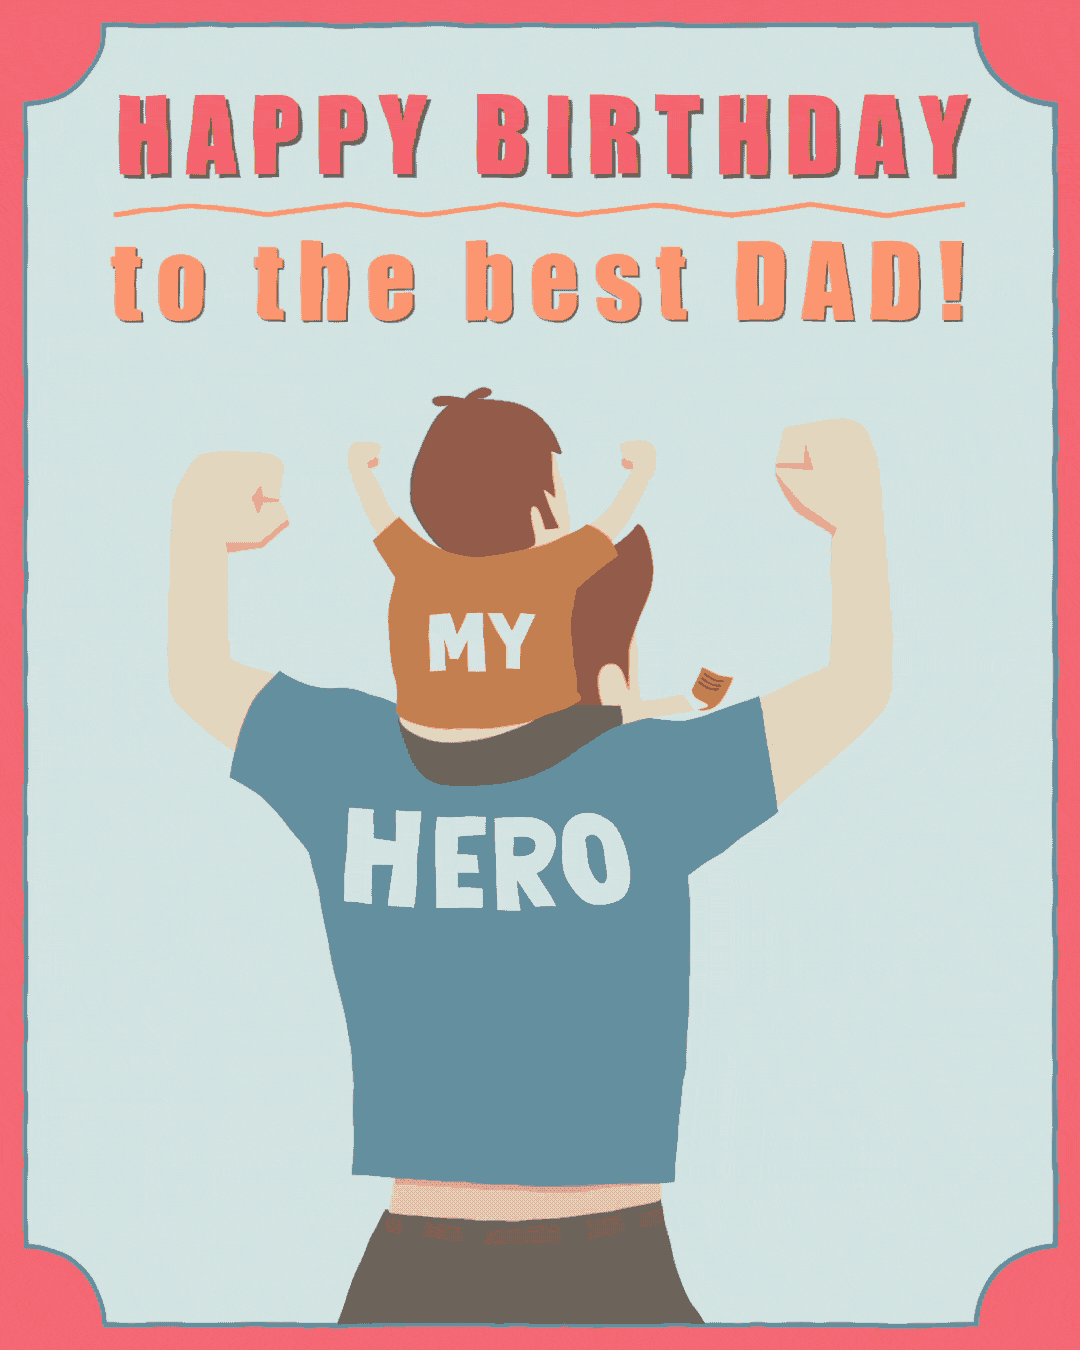 curtis popp recommends Happy Birthday Gif For Dad